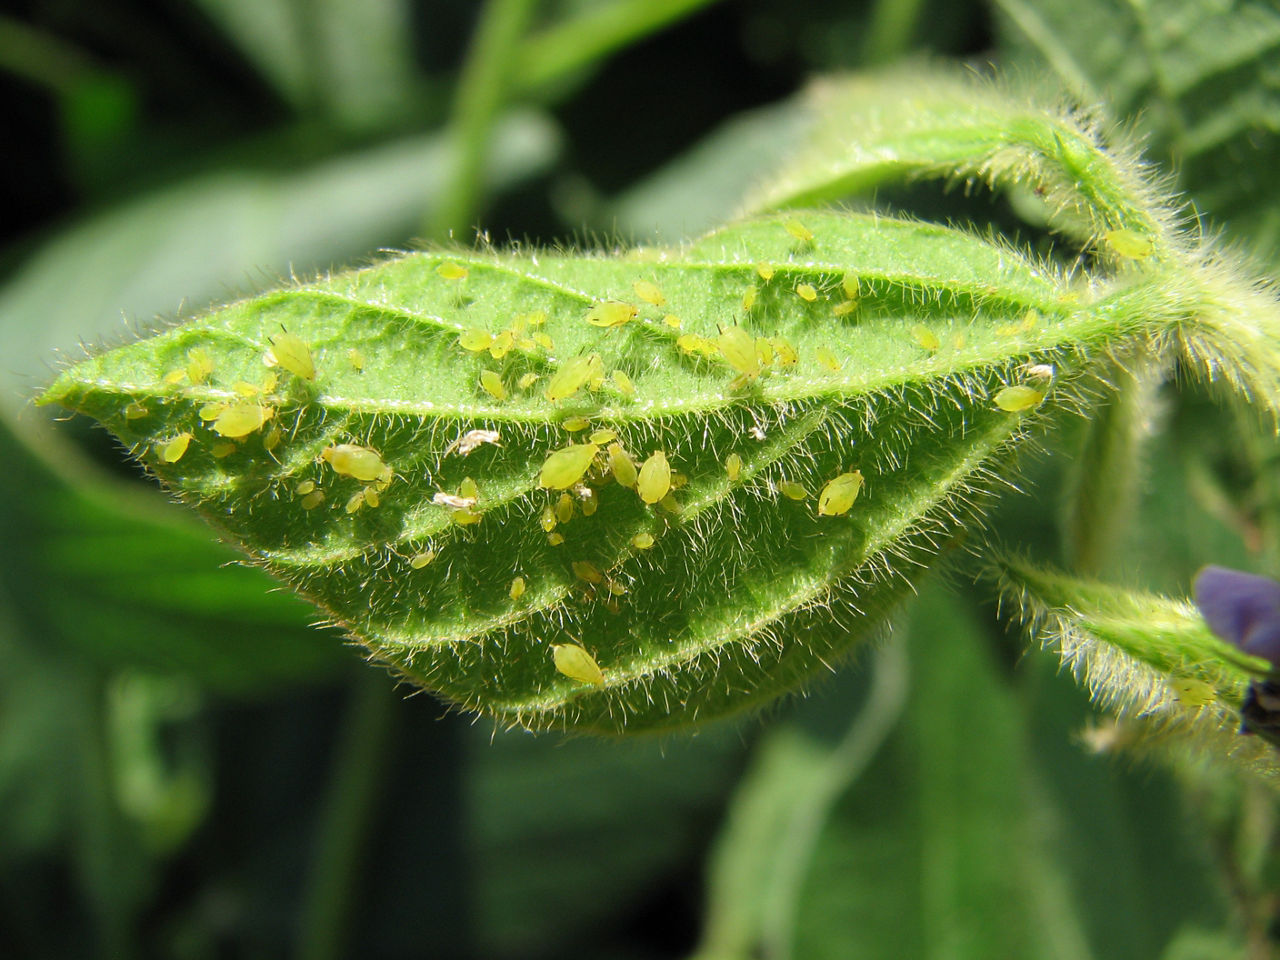 Figure 11. Leaf curling resulting from soybean aphid feeding.